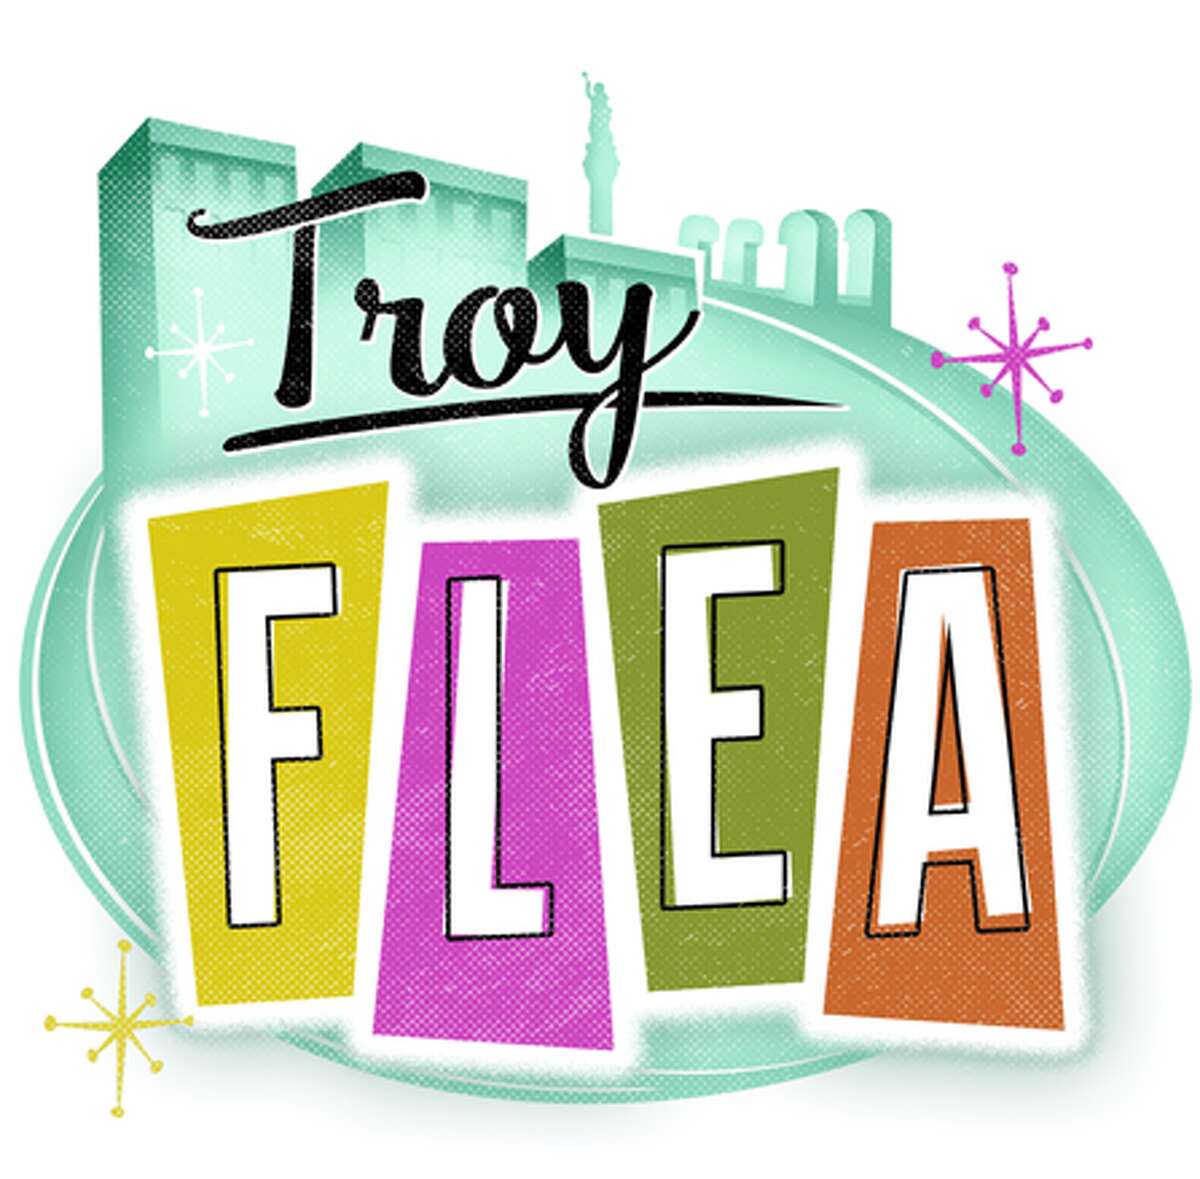 The new Troy Flea Market debuts this Sunday. Learn more about it in this Times Union blog post.